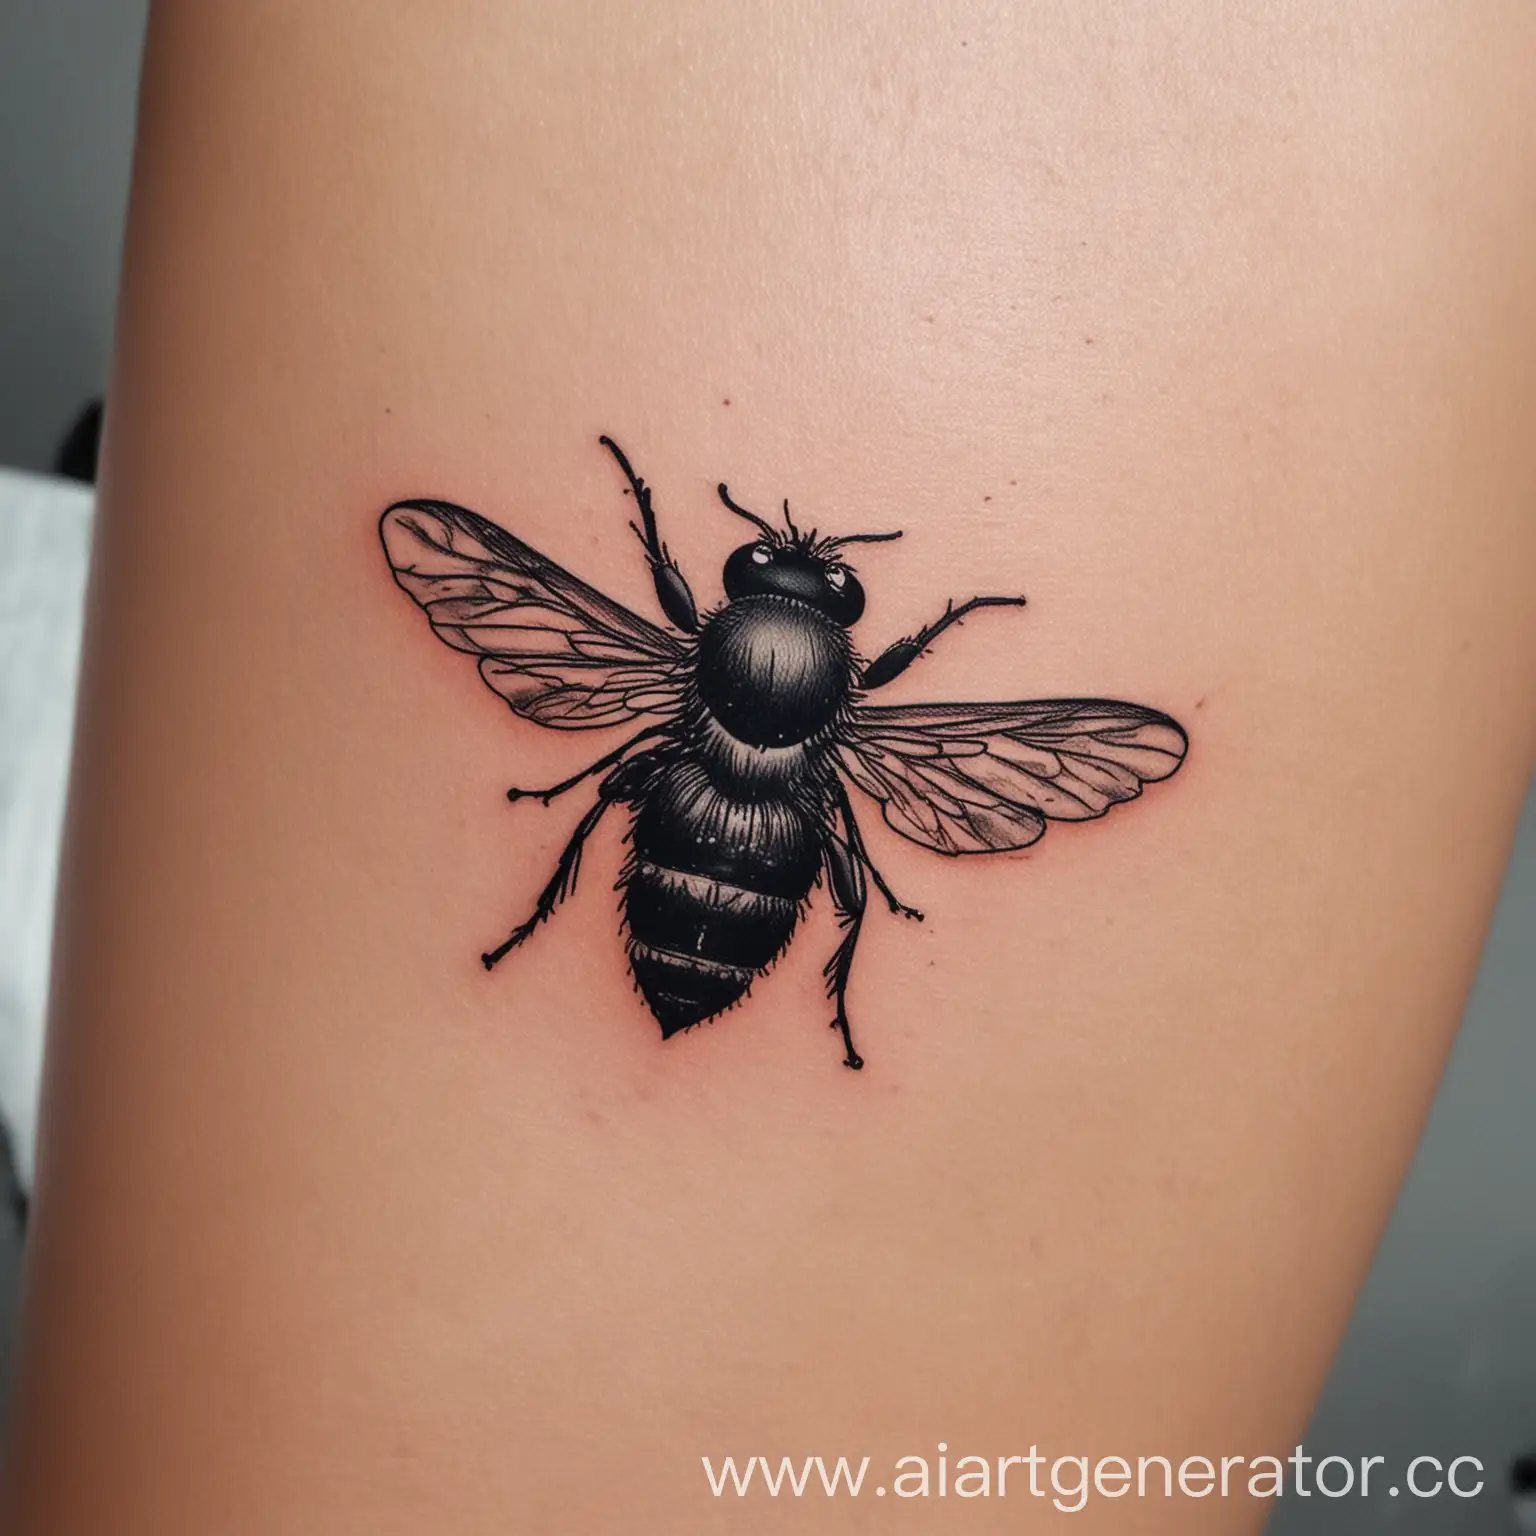 Subtle-Small-Fly-Tattoo-on-a-Girls-Skin